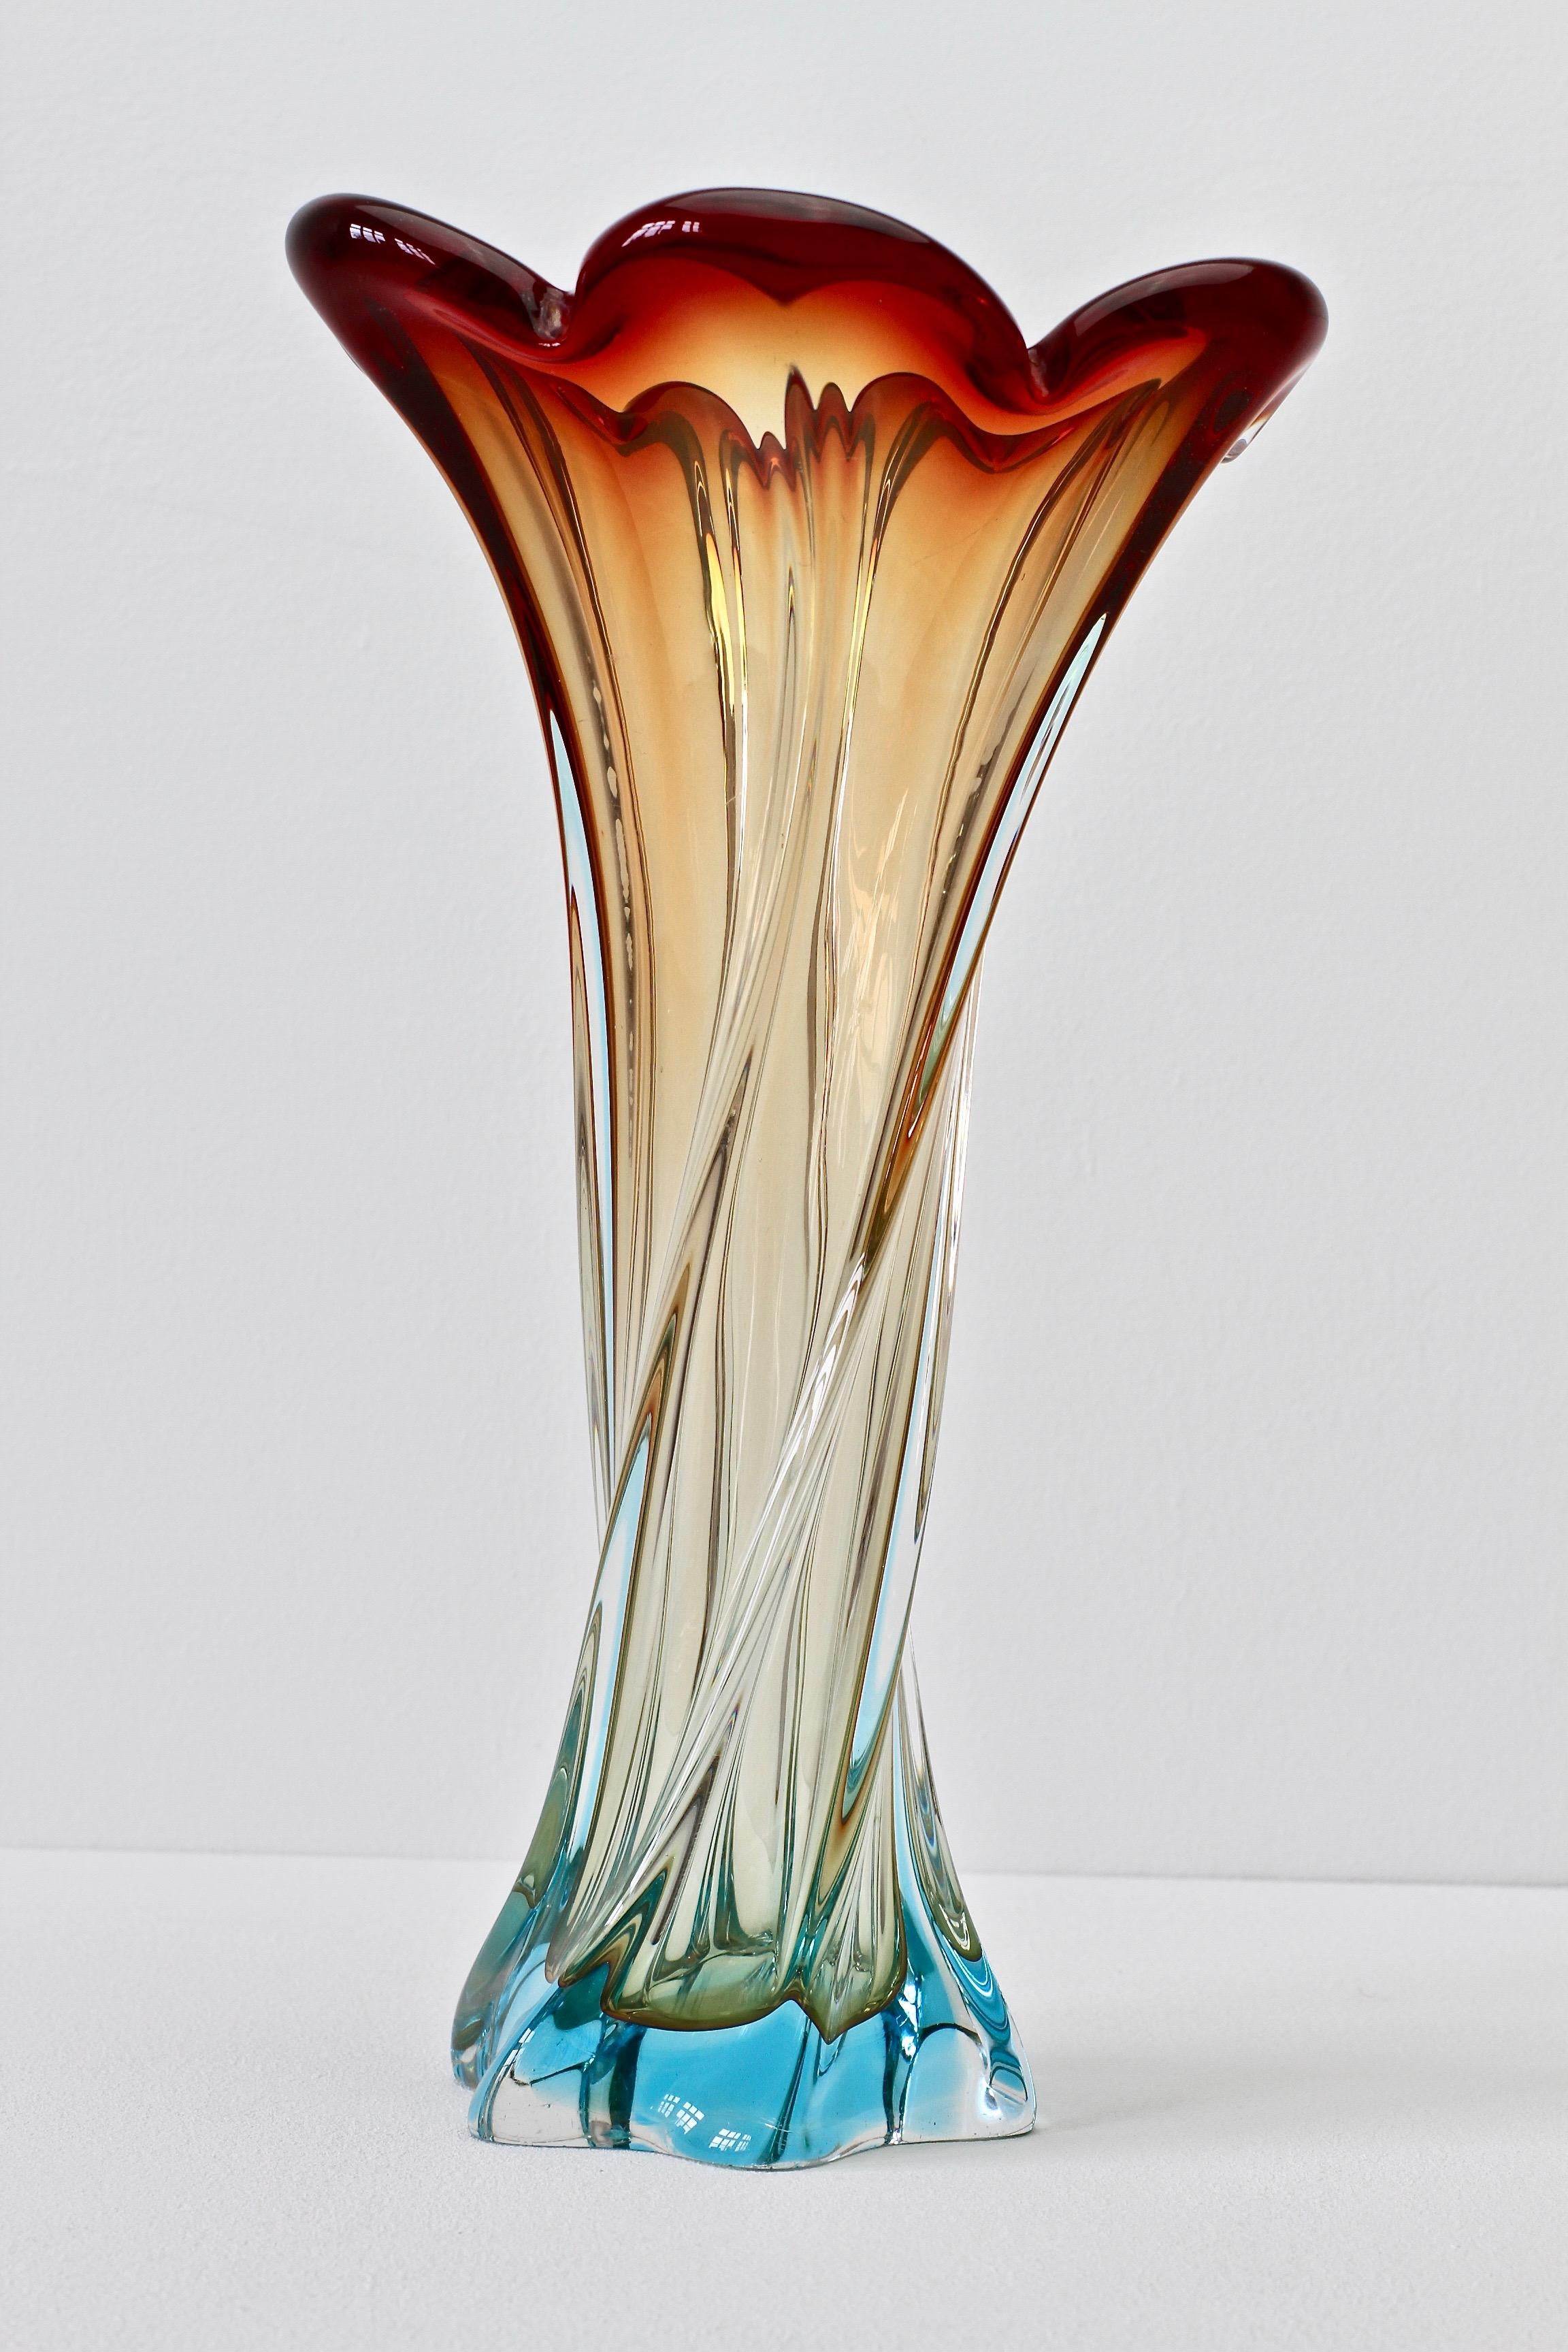 A wonderful and tall Murano style vase of maroon, amber and blue Sommerso glass. This piece is huge at almost twelve inches tall. A wonderful statement piece and would look exceptional as a centrepiece filled with beautiful flowers or on display on